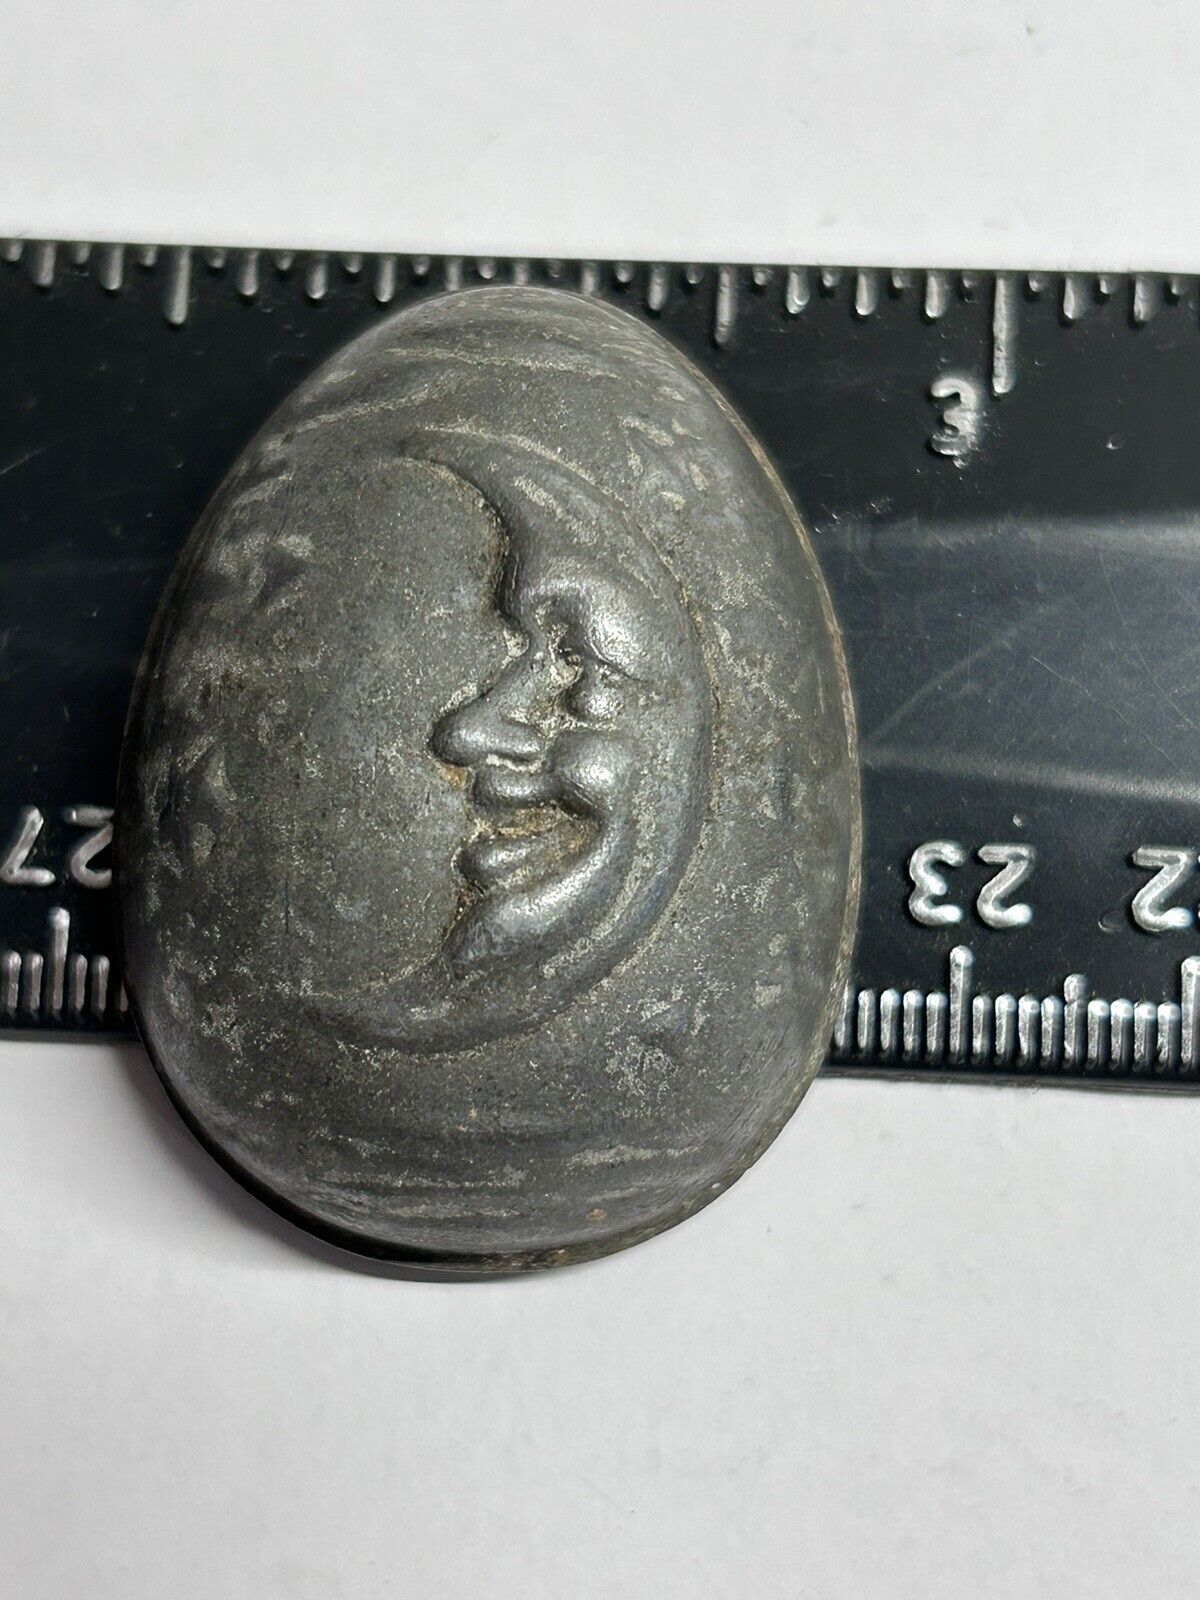 Antique Tin Chocolate/Candy Mold Small Egg Shape Crescent Moon Face 